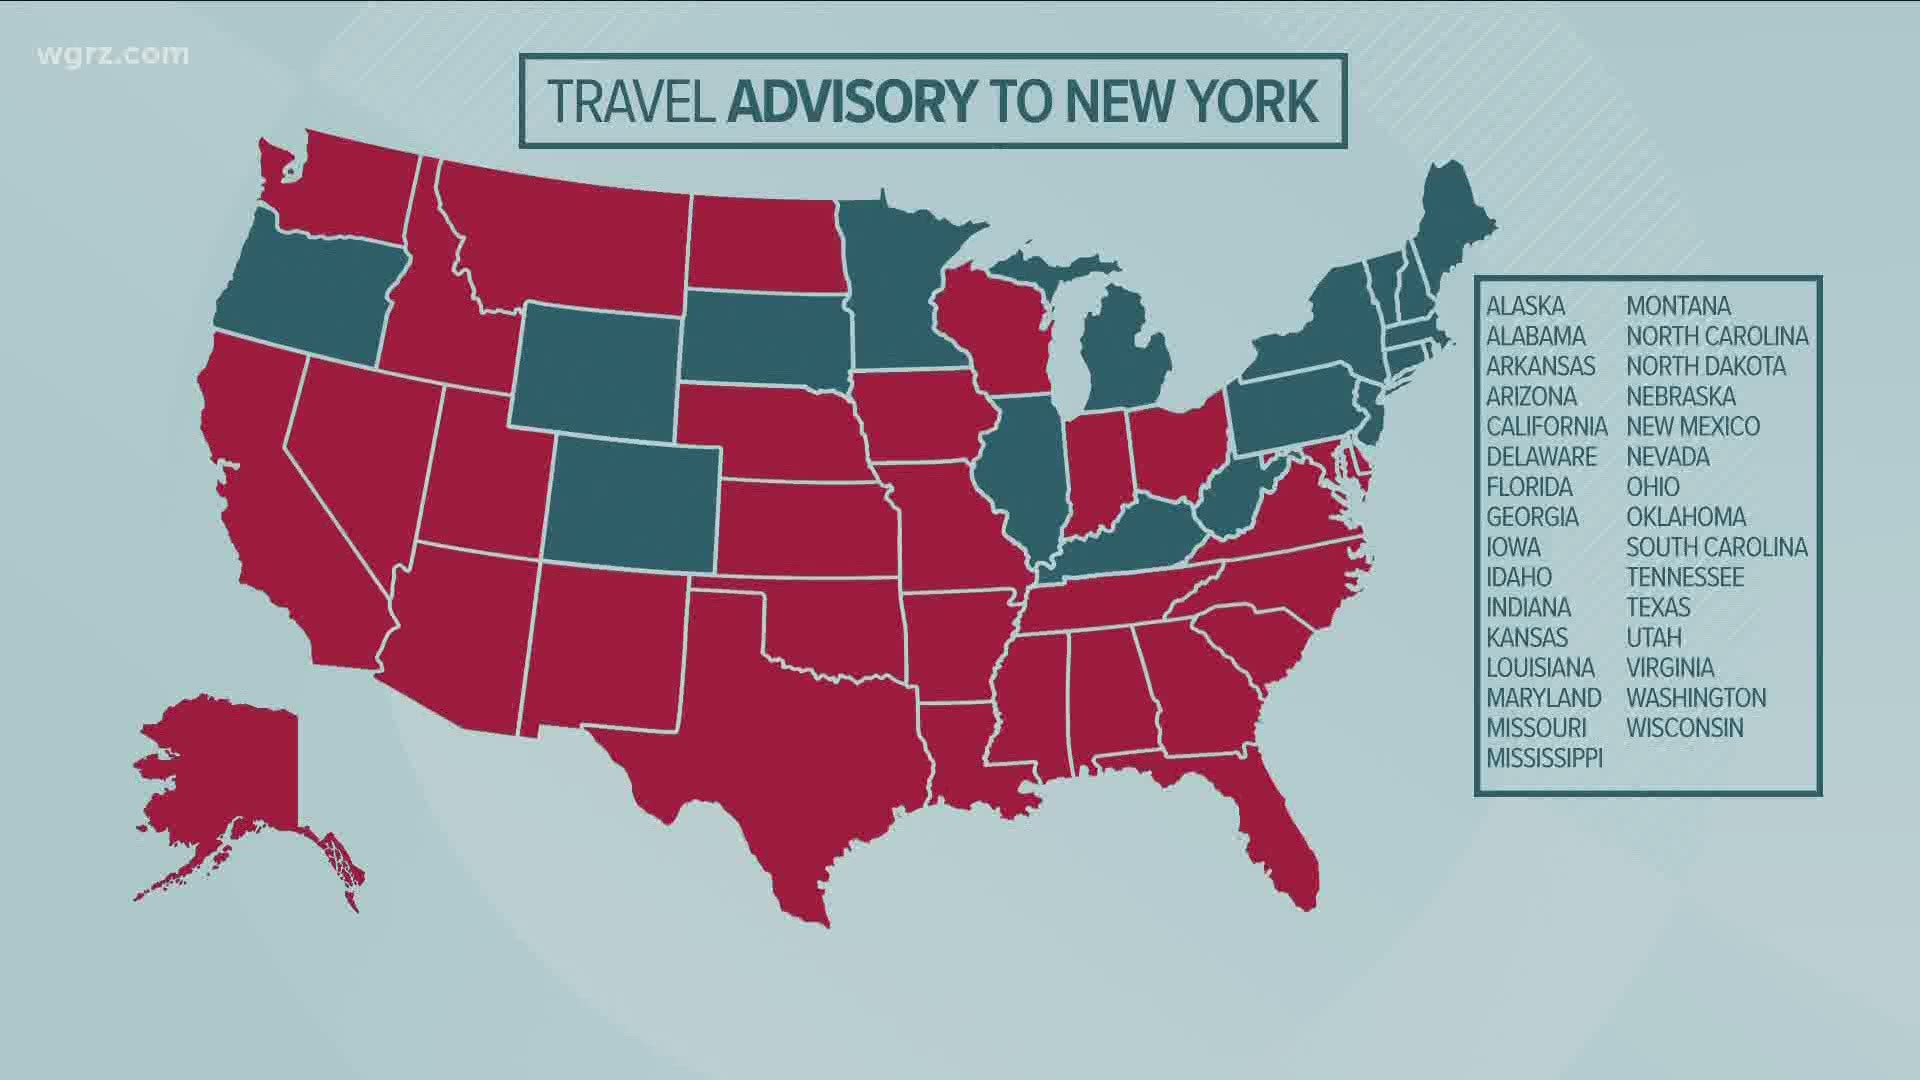 More than half the country is now on New York's travel advisory list, with the addition often more states today.